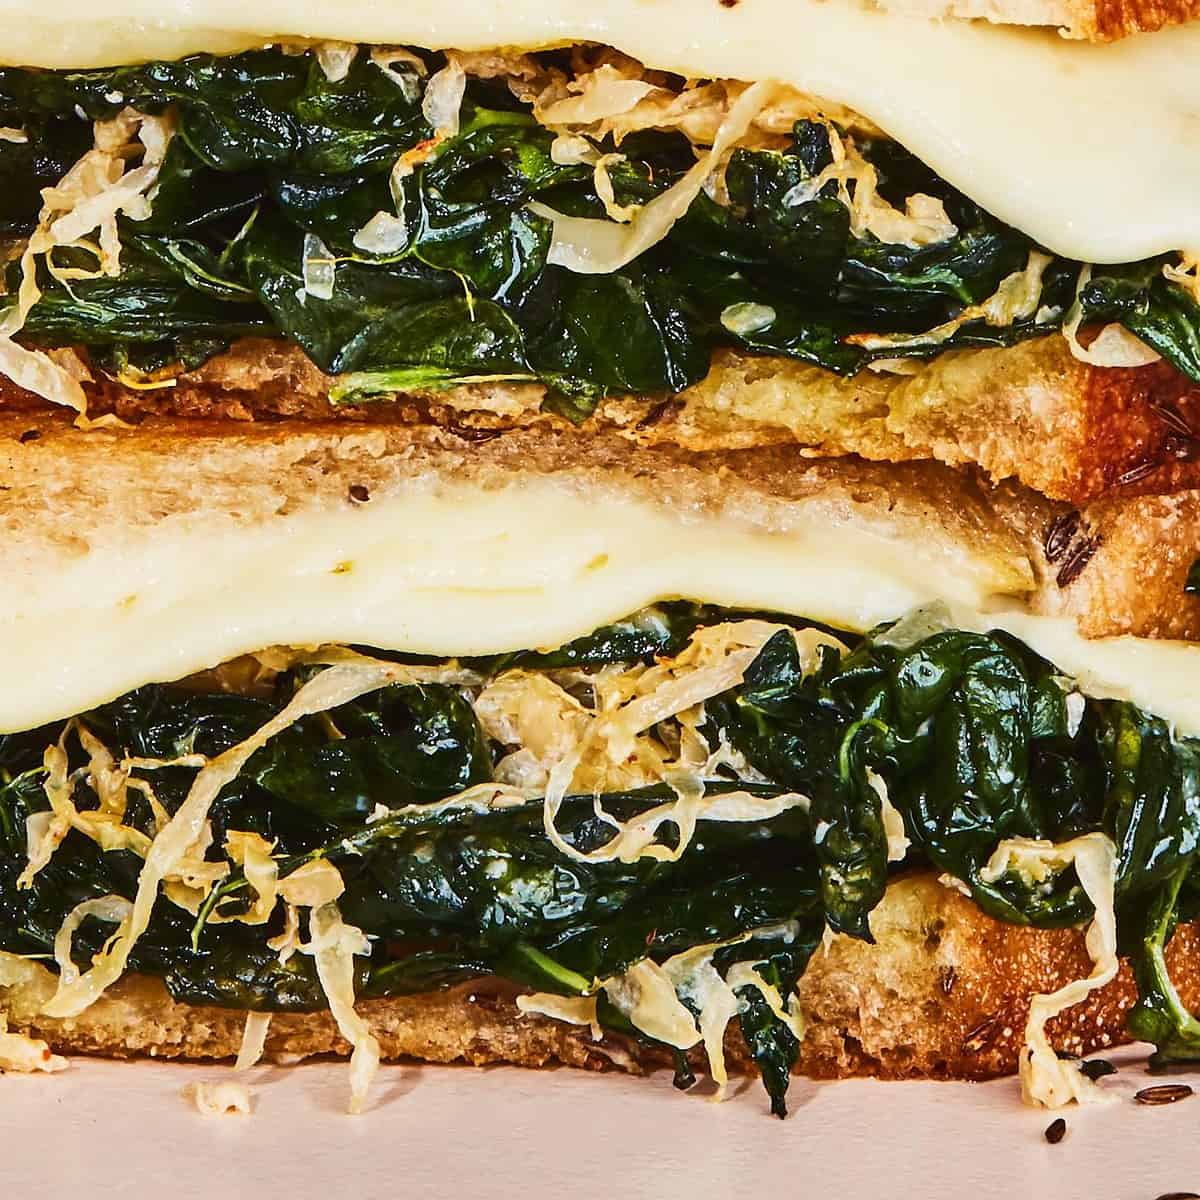  Move over meat, this sandwich is just as hearty and filling.